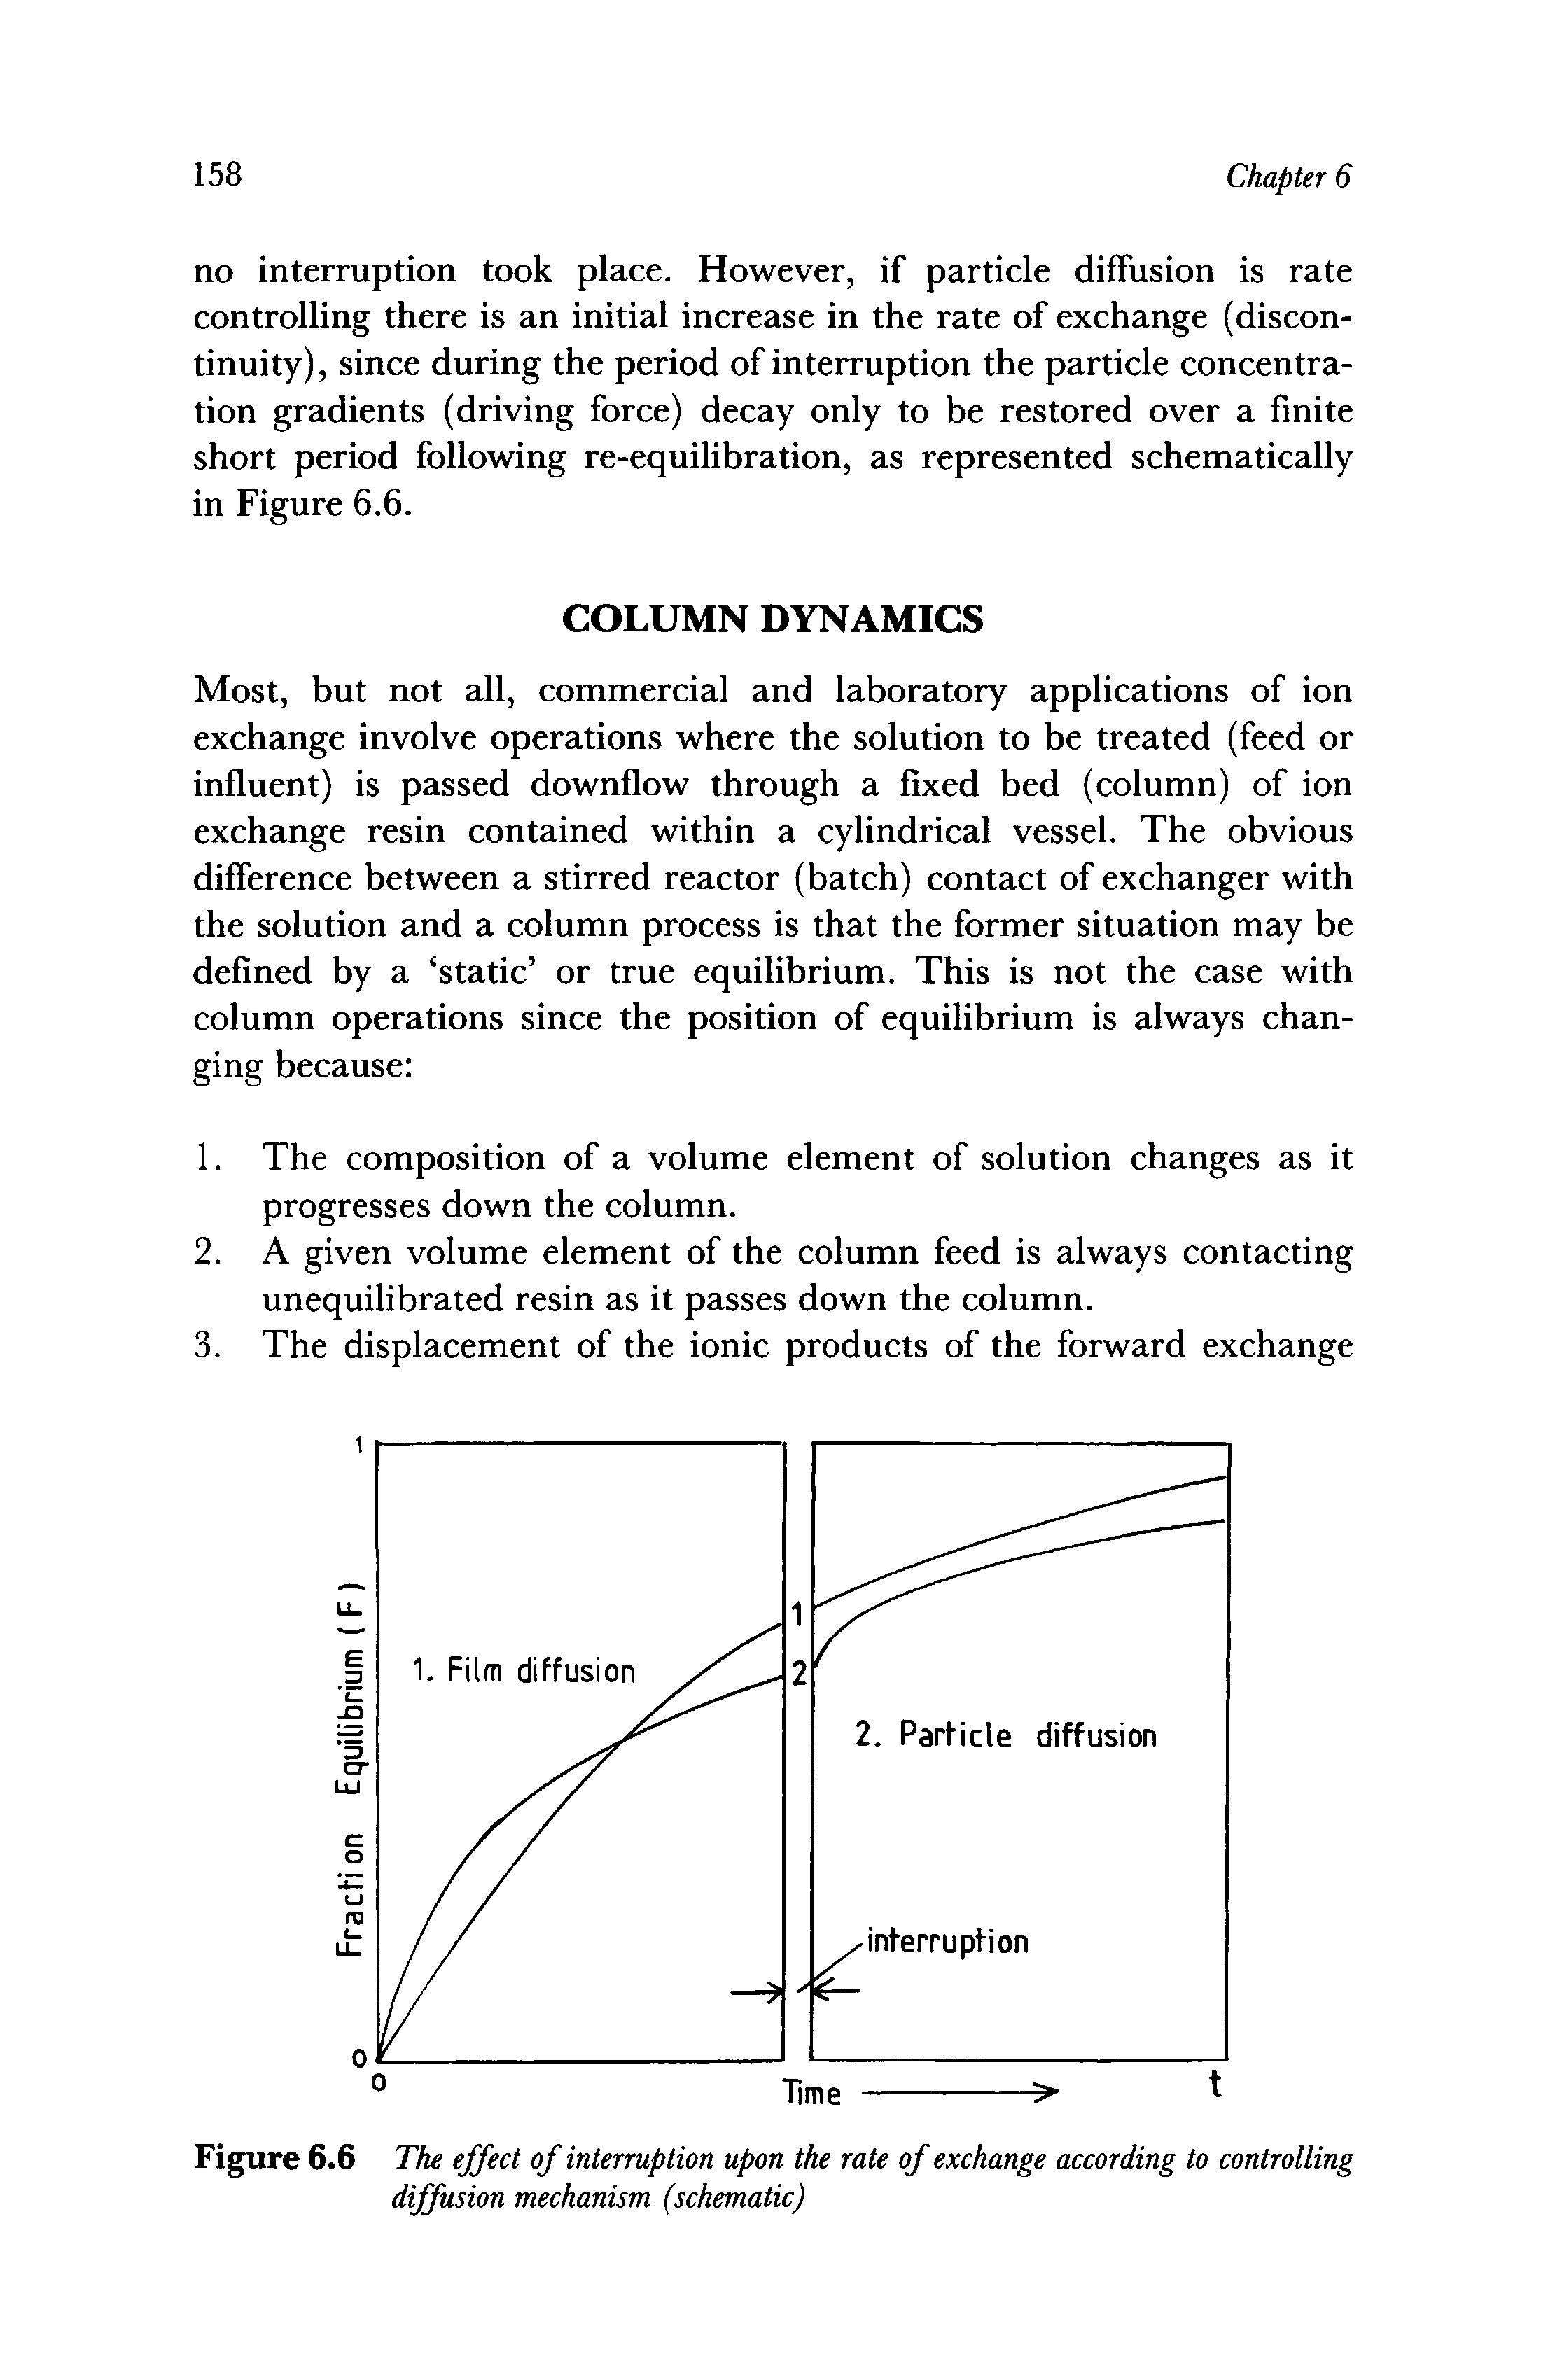 Figure 6.6 The effect of interruption upon the rate of exchange according to controlling diffusion mechanism (schematic)...